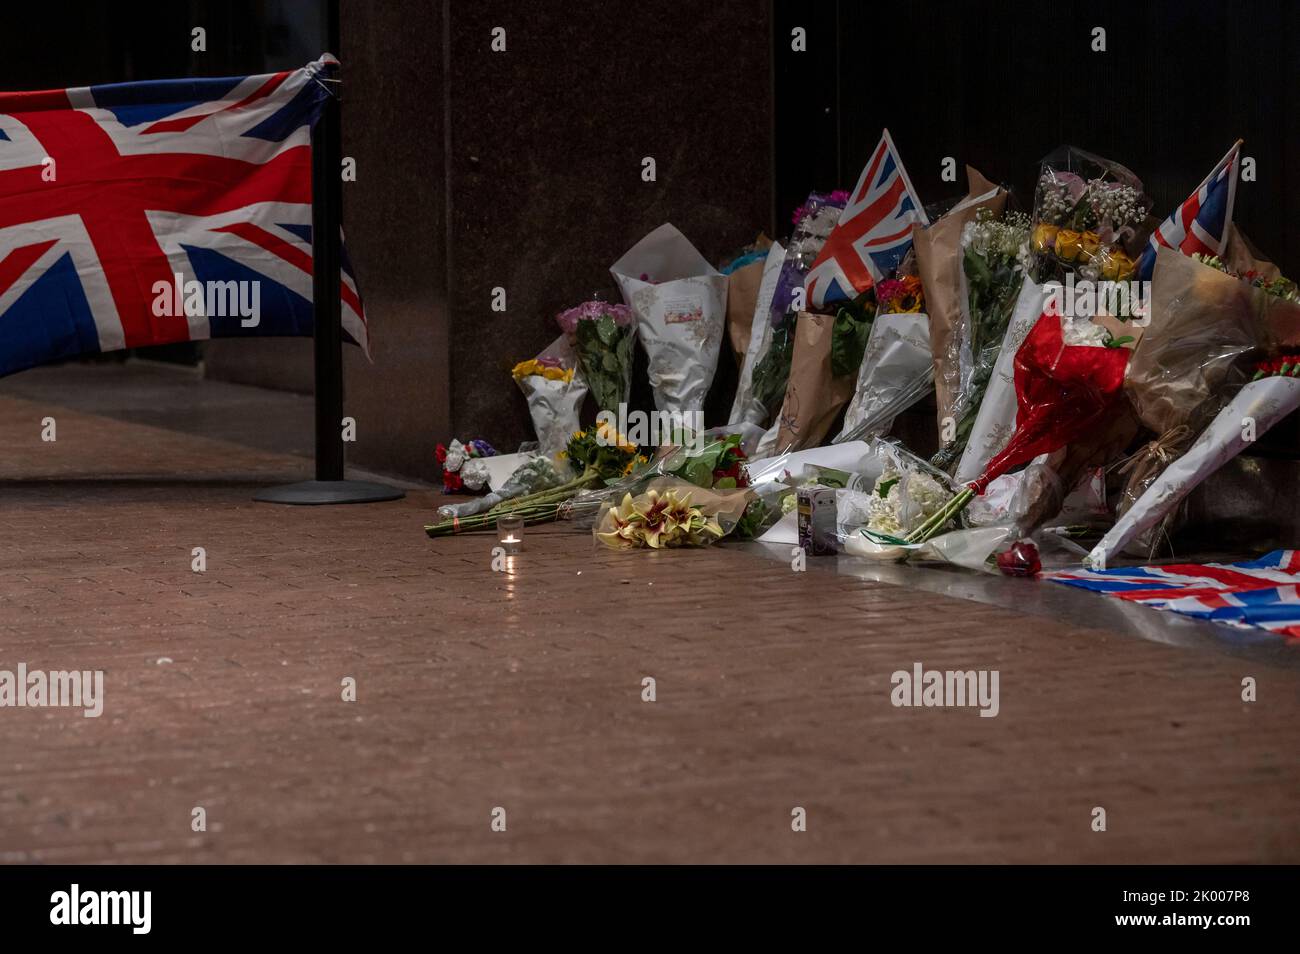 NEW YORK, NEW YORK - SEPTEMBER 08: Floral tributes, candles and British flags for Her Majesty Queen Elizabeth II are seen outside of The British Consulate General in New York on September 8, 2022 in New York City. According to a statement issued by Buckingham Palace on 08 September 2022, Britain's Queen Elizabeth II has died at her Scottish estate, Balmoral Castle, on 08 September 2022. The 96-year-old Queen was the longest-reigning monarch in British history. Stock Photo